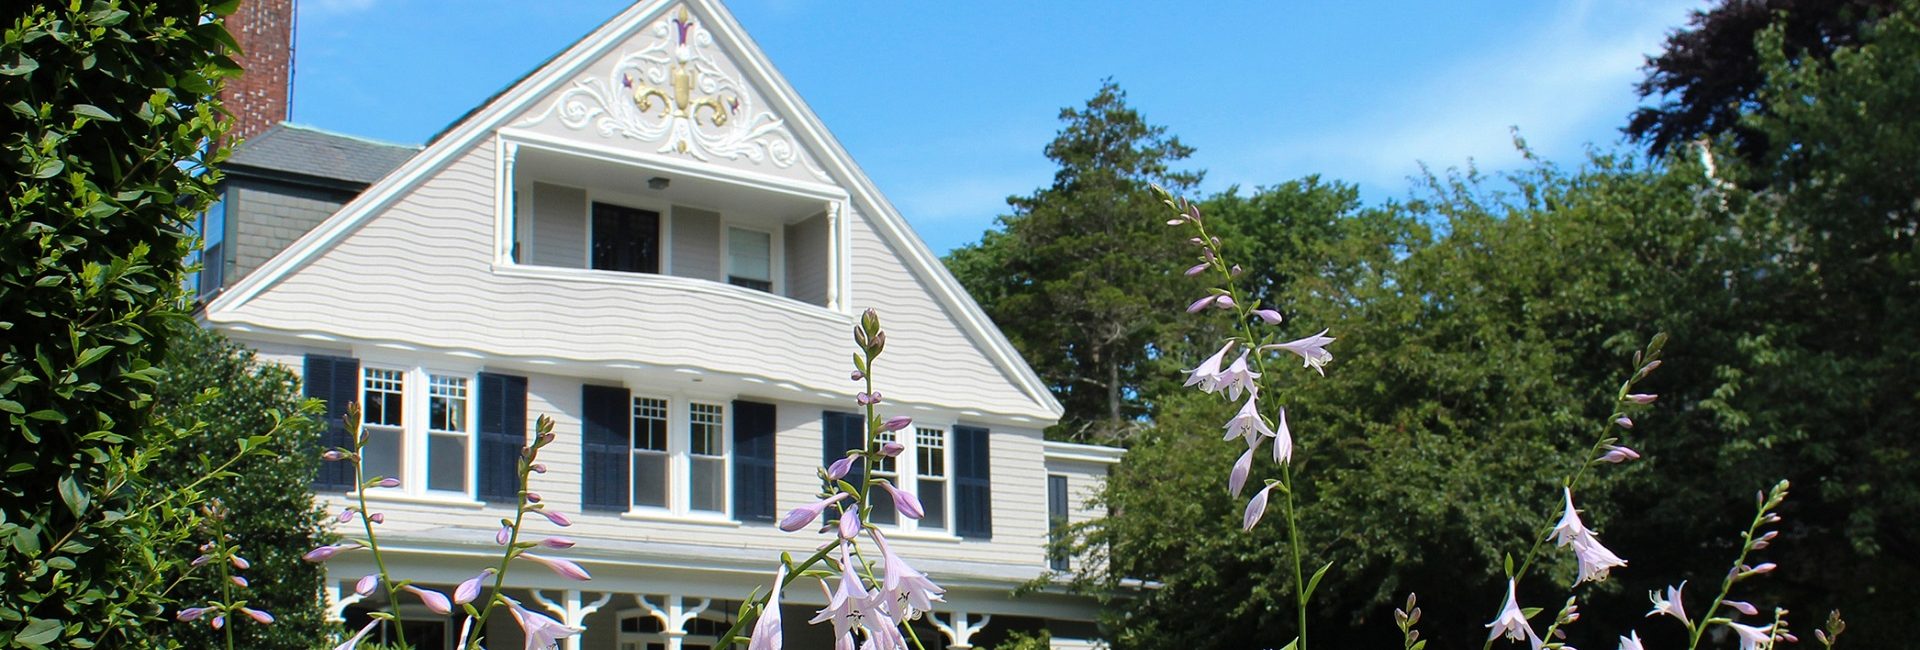 The Best Bed And Breakfasts Find A Bed And Breakfast - 